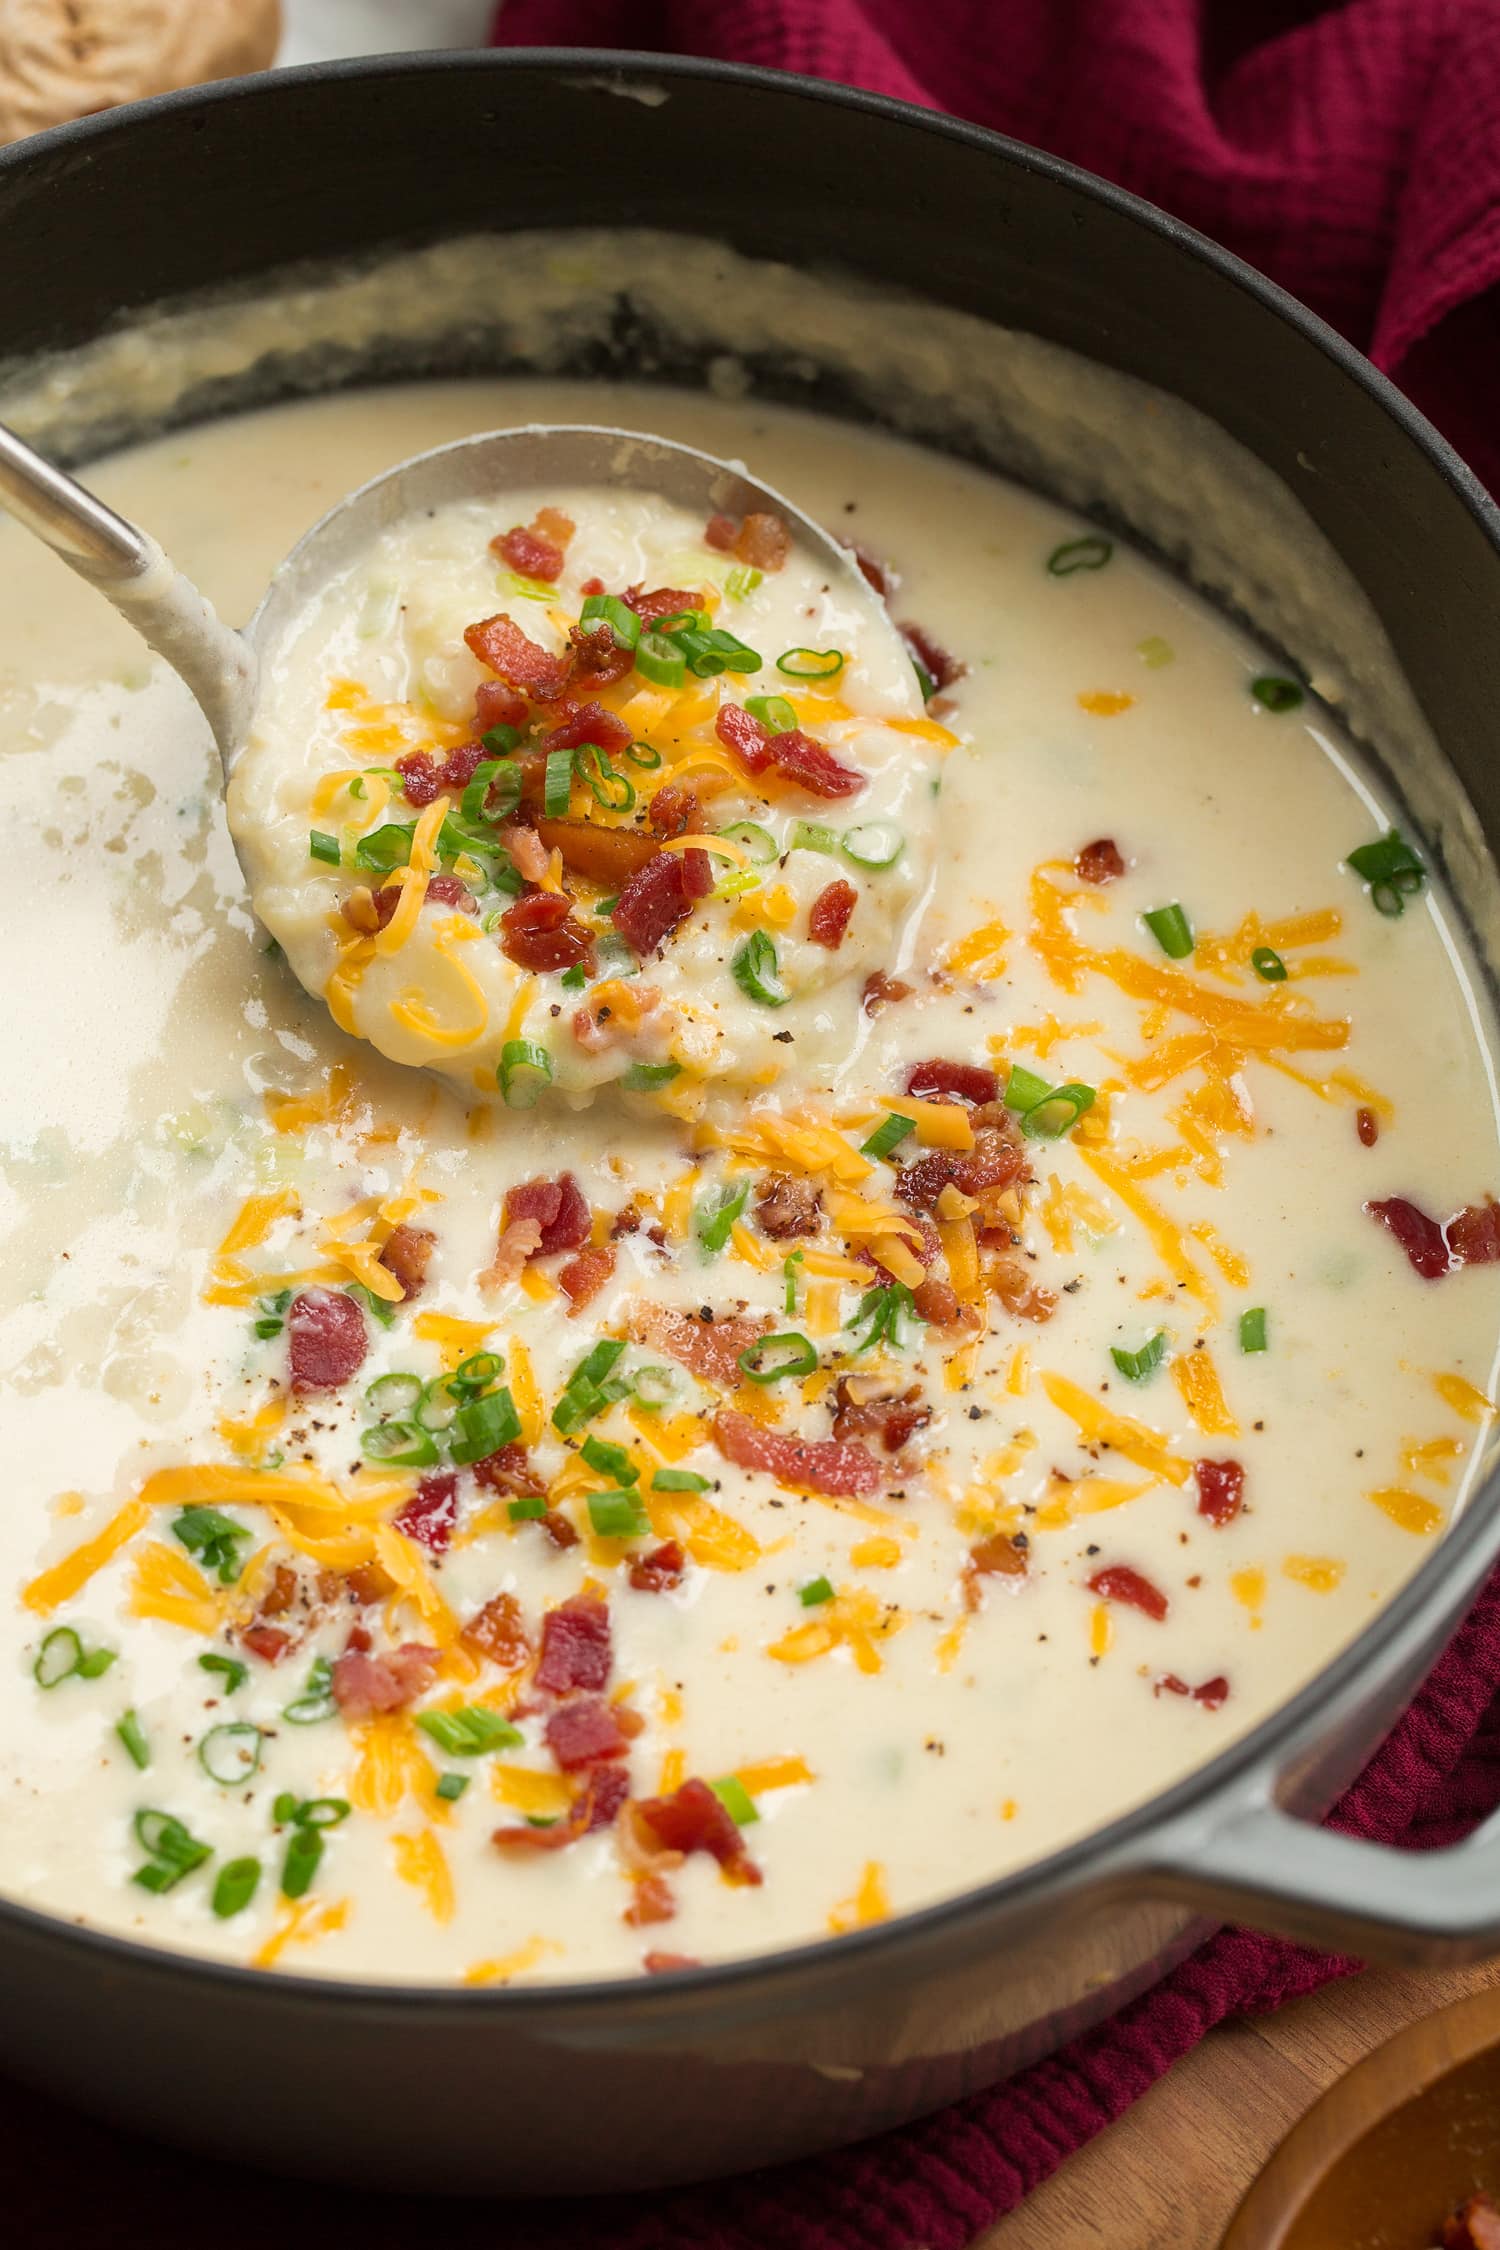 Pot full of baked potato soup with a ladle scooping out.